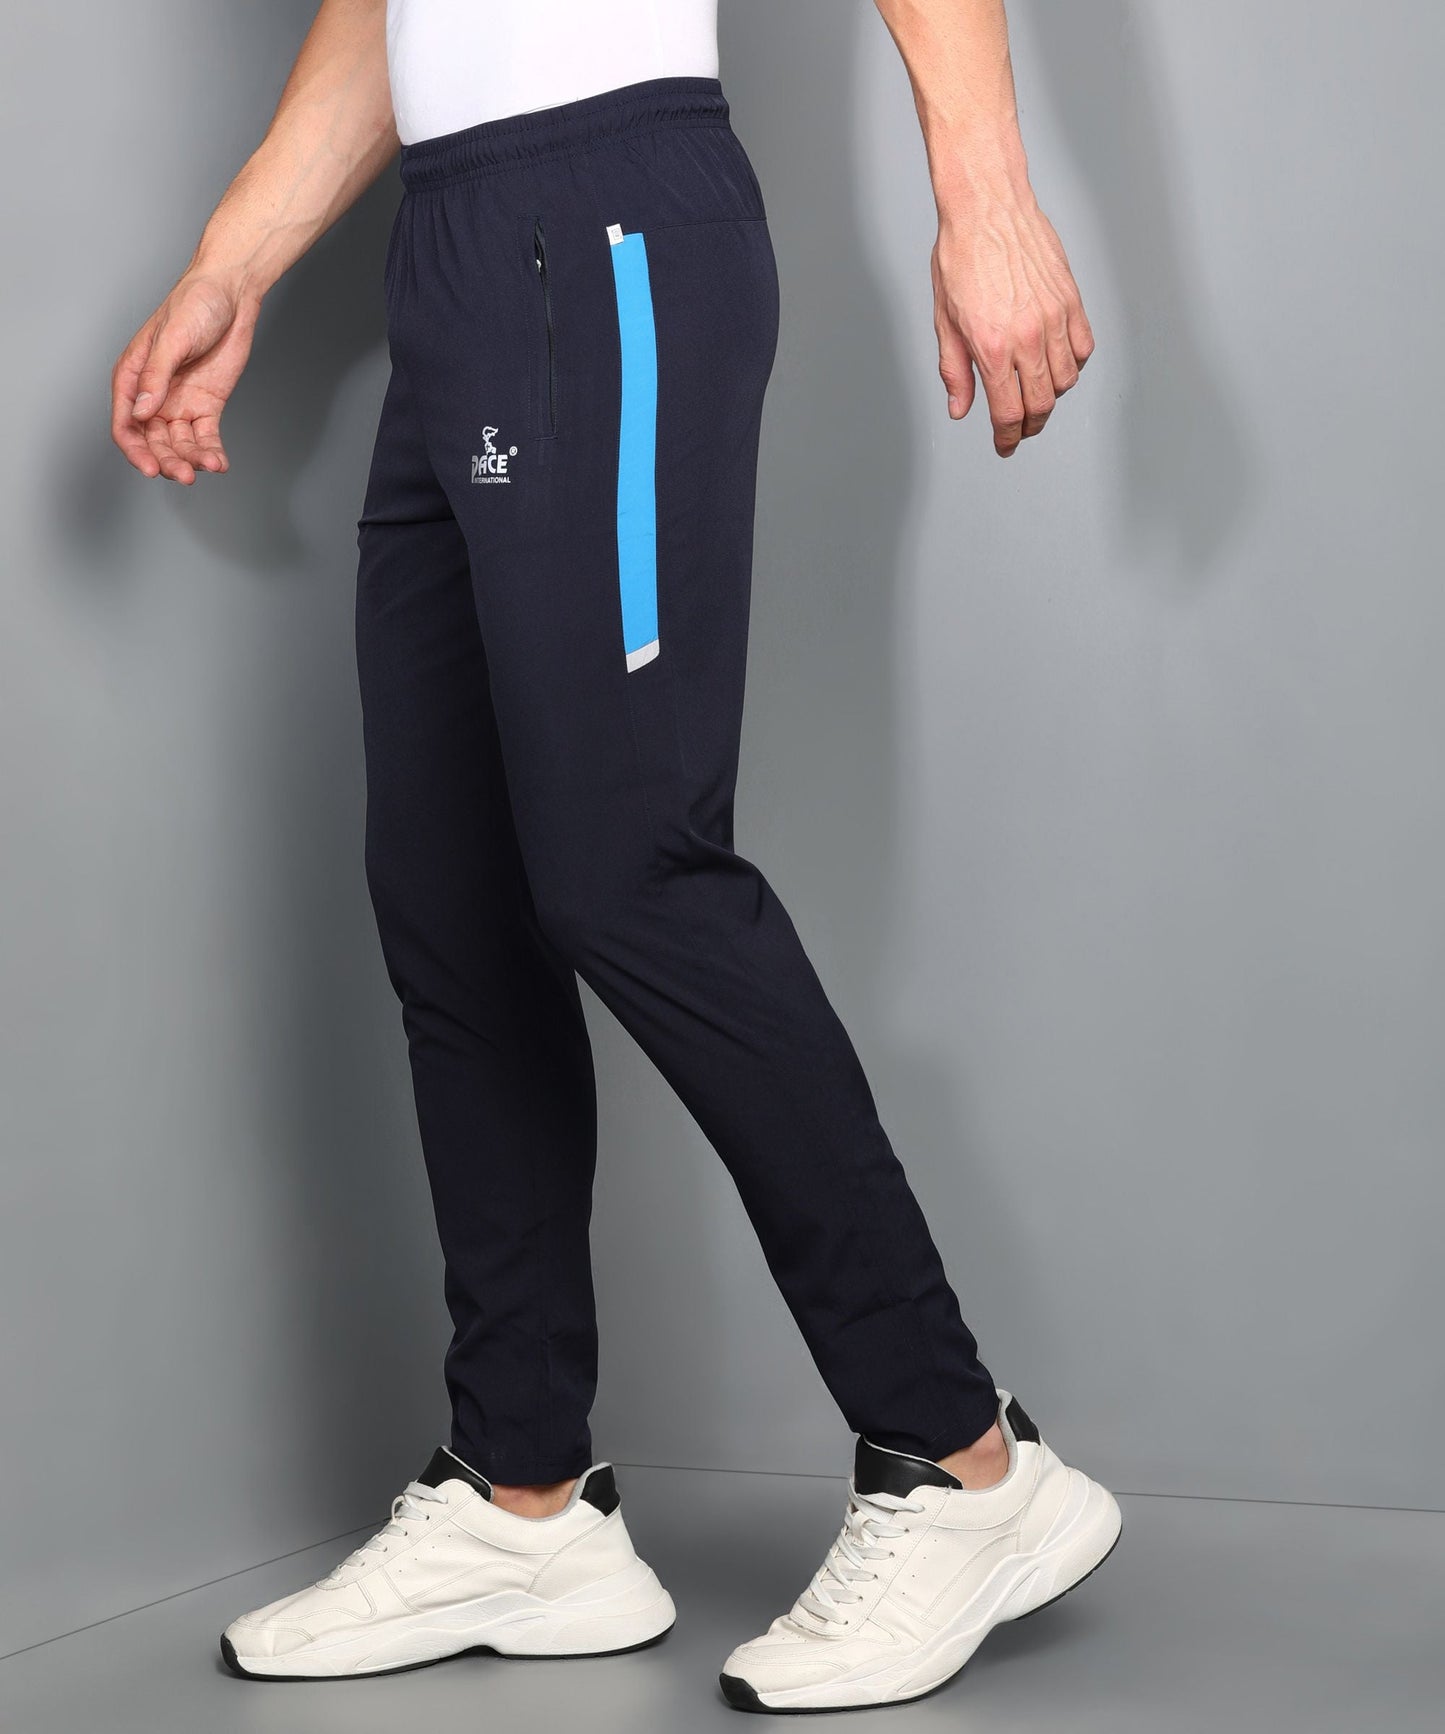 Men's Gym Pants Workout Running Athletic Joggers Slim Fit Sport Track Pants  with Zipper Pockets - Walmart.com